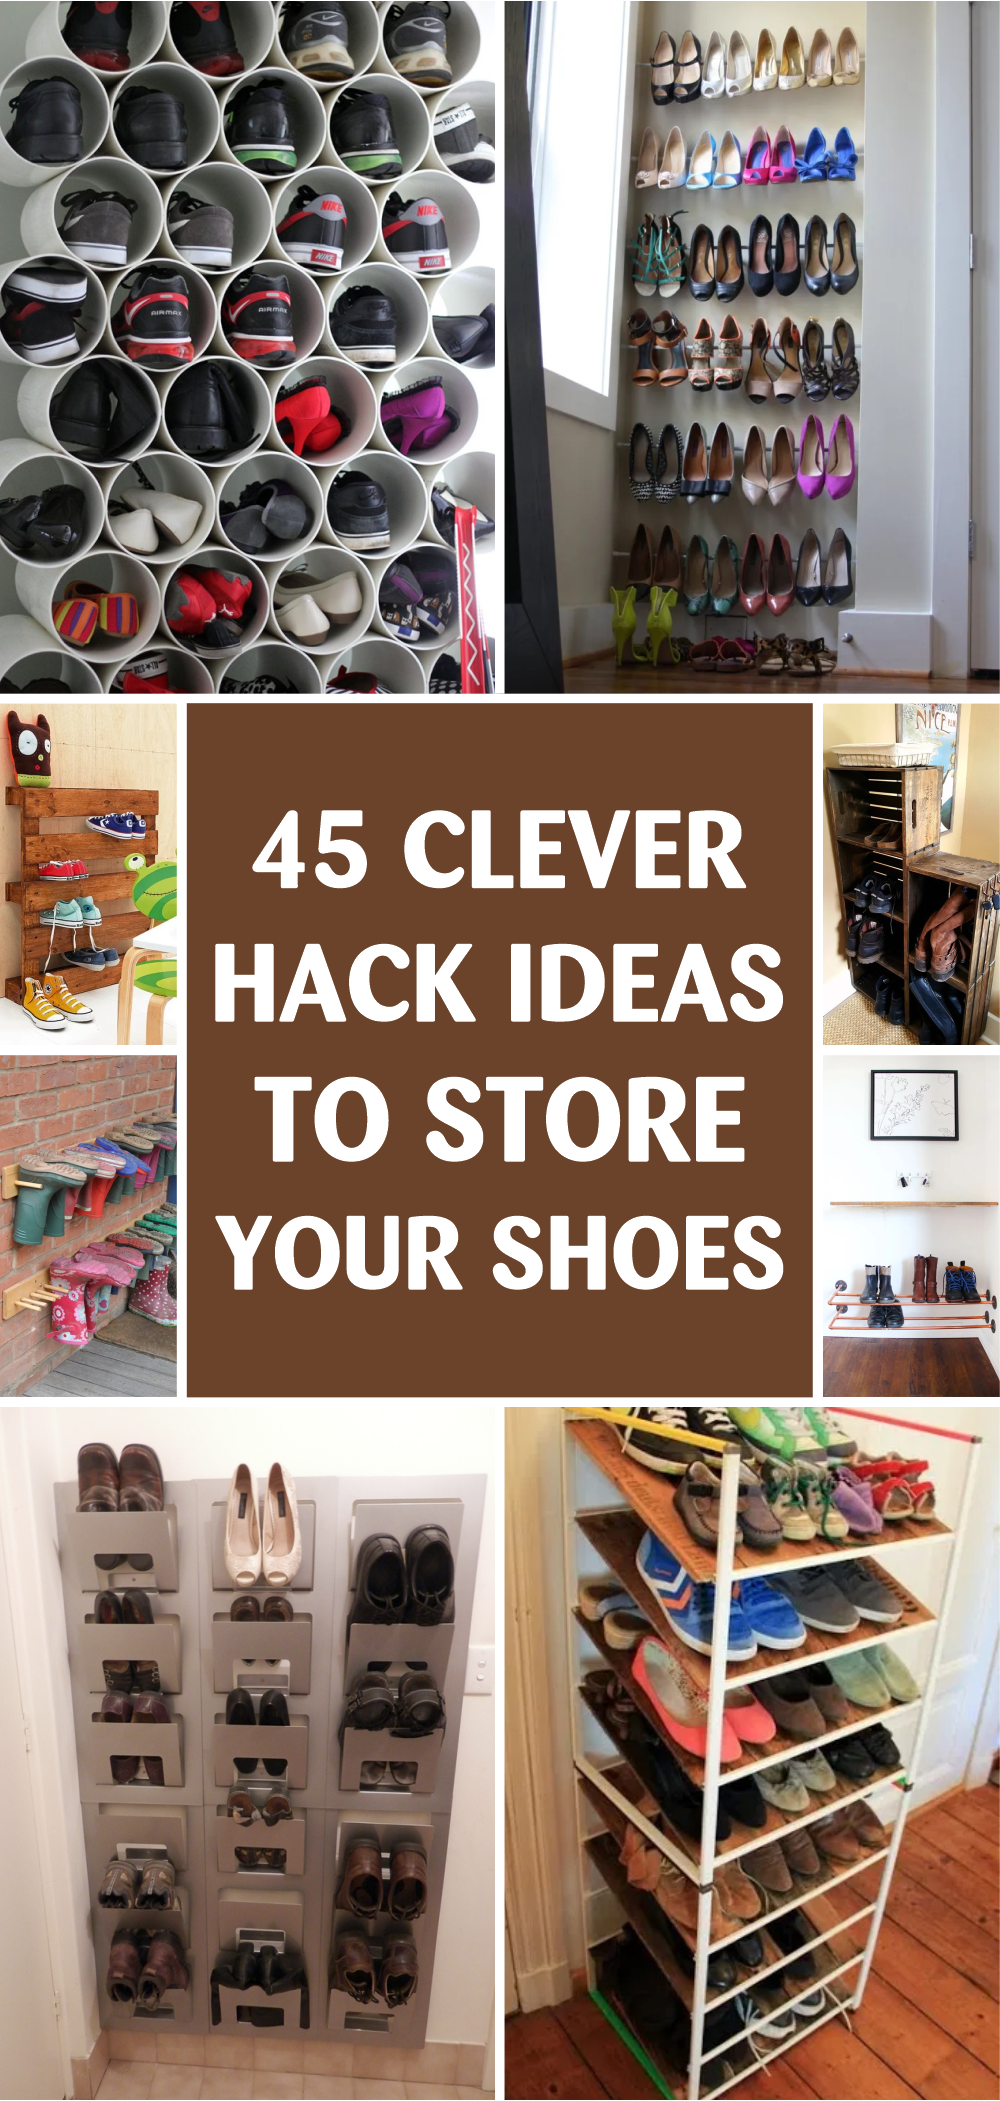 45 Clever Hack Ideas to Store Your Shoes